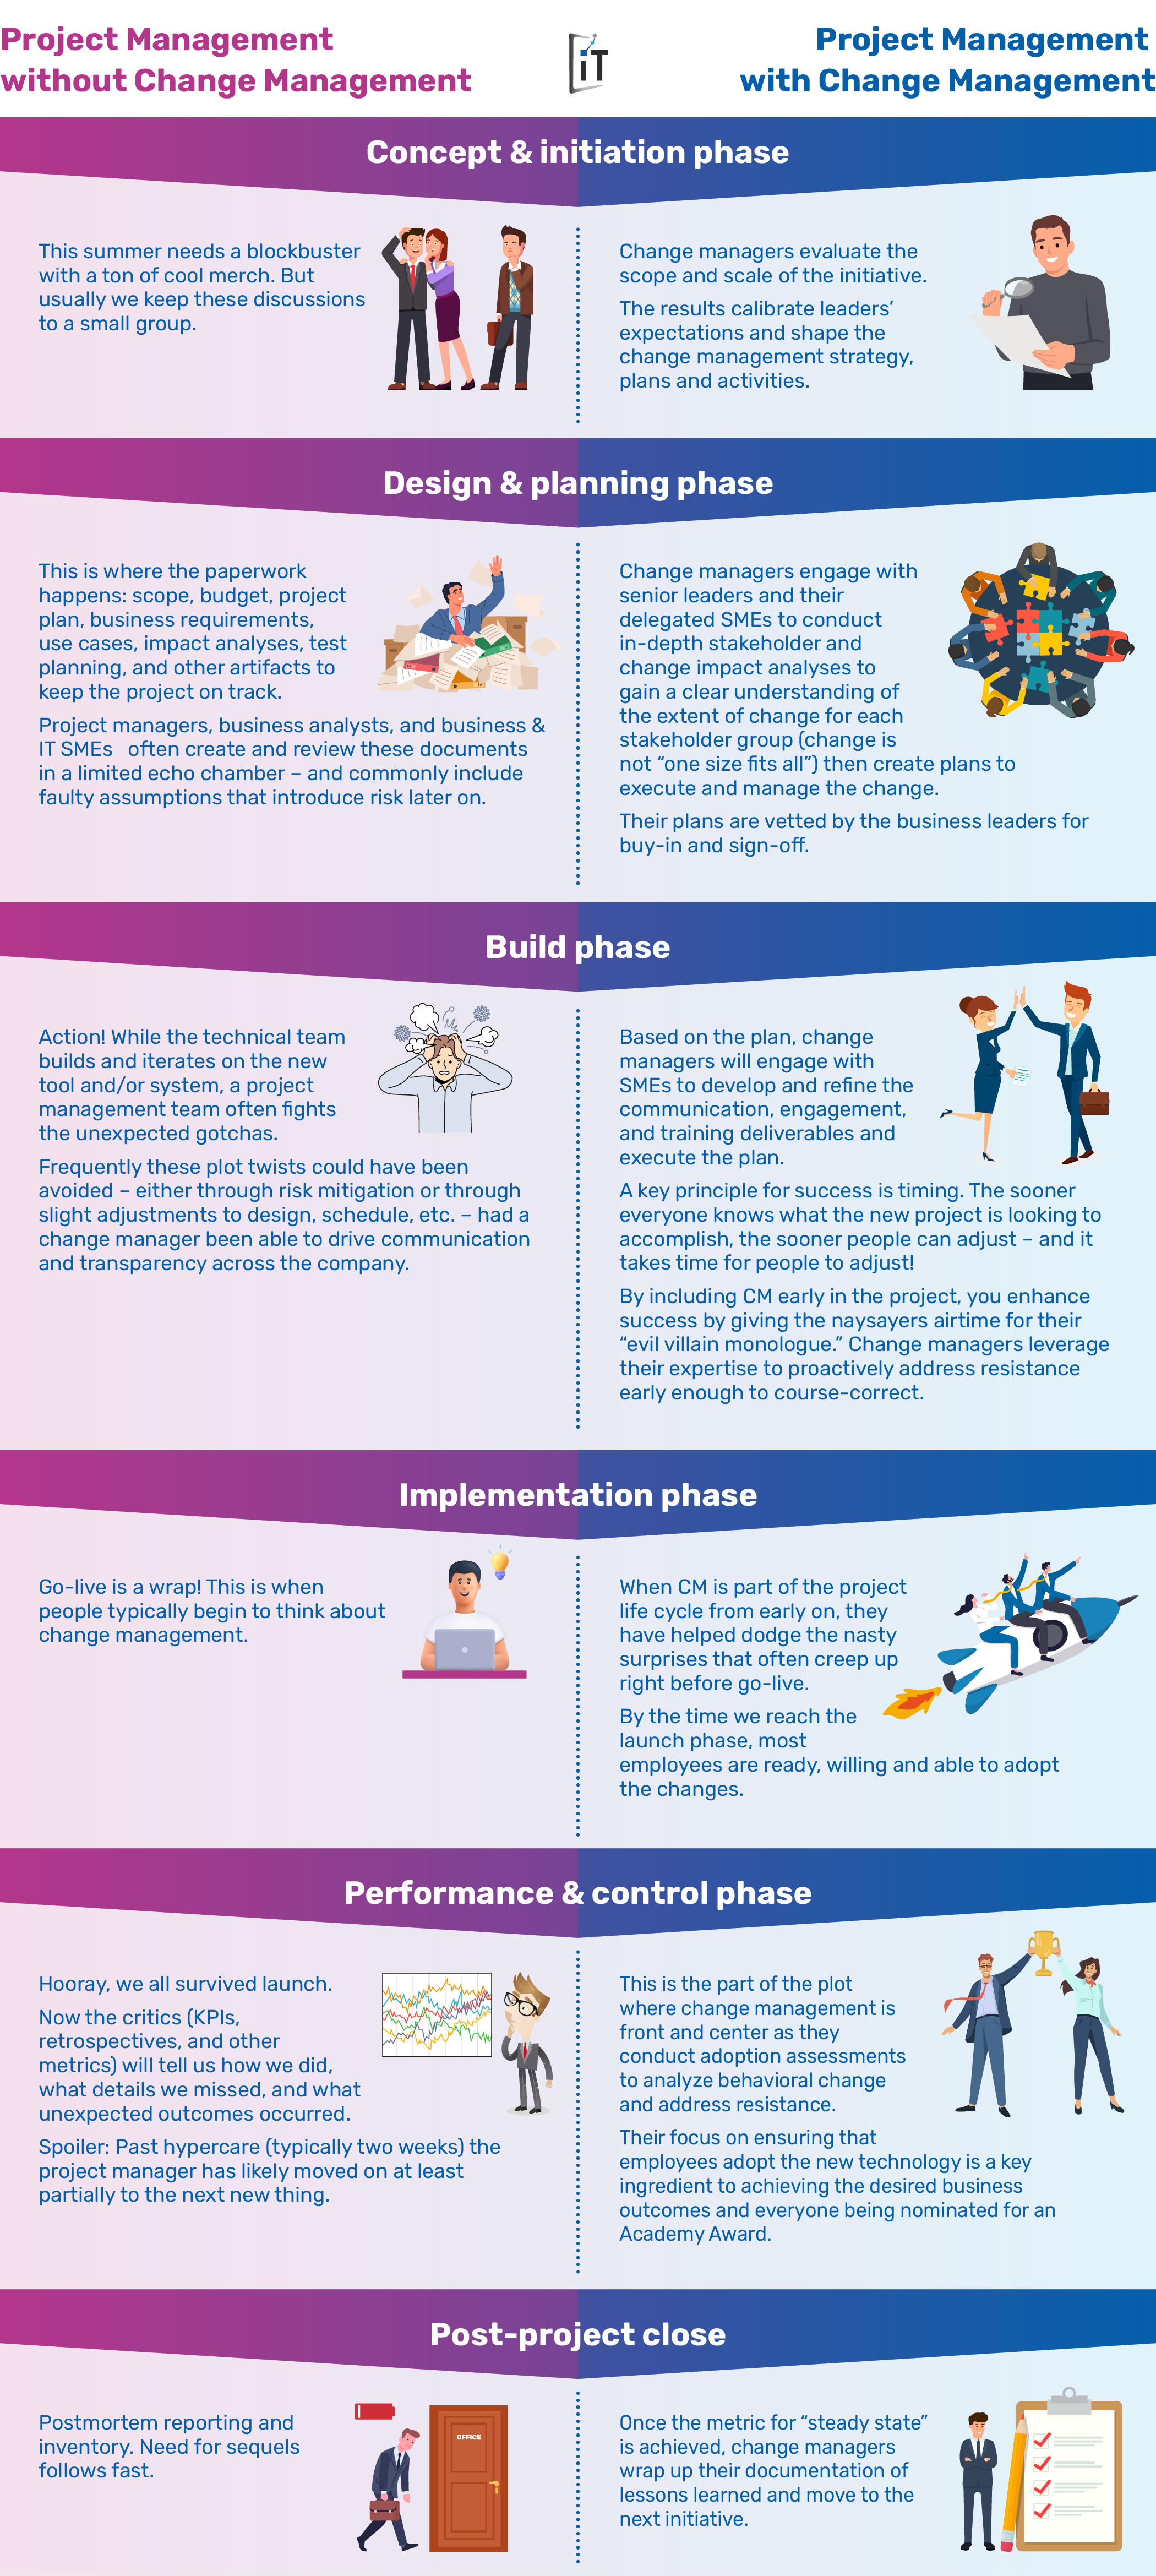 Infographic describing project management with and without change management - iTalent Digital blog